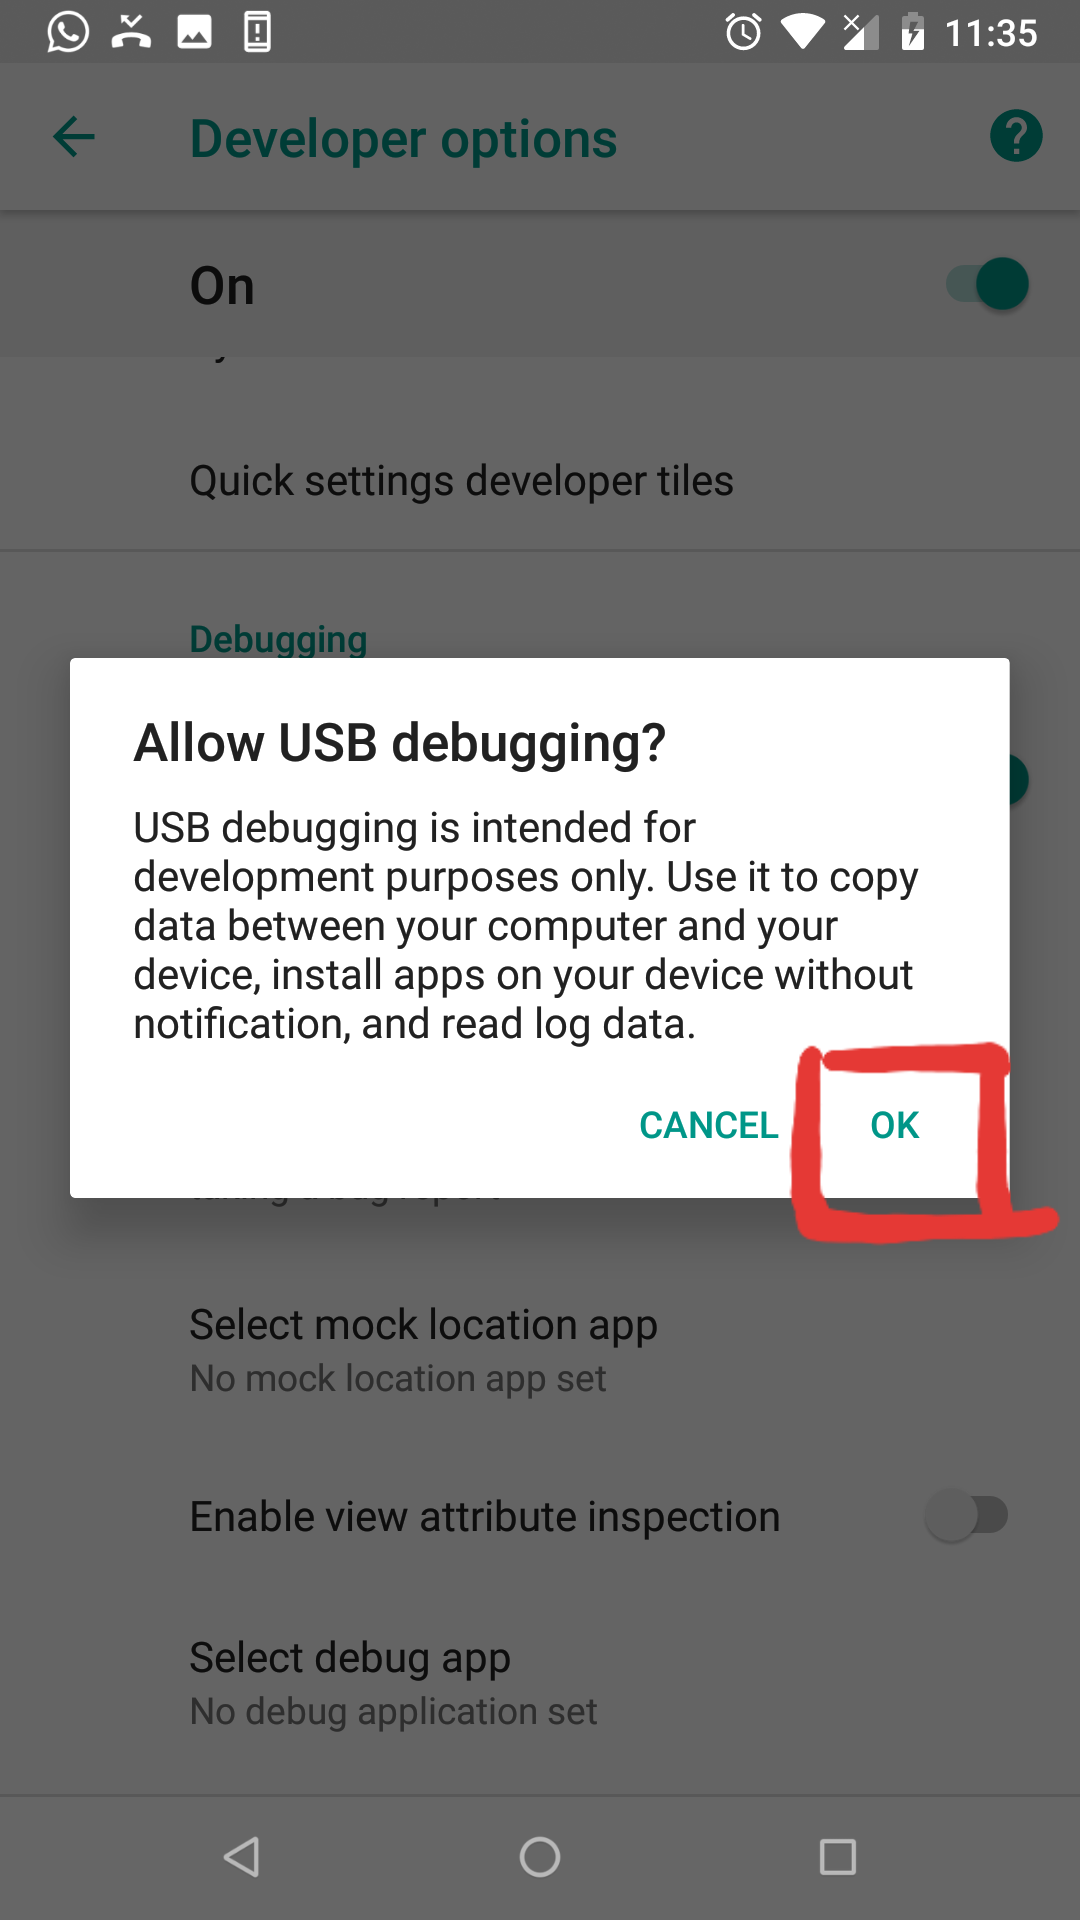 Cara Mengaktifkan Opsi Pengembang untuk Proyek Android Studio "width =" 1080 "height =" 1920 "srcset =" https://krispitech.com/wp-content/uploads/2020/02/How-to-turn-on- developer-options-for-android-studio-project-7.png 1080w, https://krispitech.com/wp-content/uploads/2020/02/How-to-turn-on-developer-options-for-android -studio-project-7-169x300.png 169w, https://krispitech.com/wp-content/uploads/2020/02/How-to-turn-on-developer-options-for-android-studio-project- 7-768x1365.png 768w, https://krispitech.com/wp-content/uploads/2020/02/How-to-turn-on-developer-options-for-android-studio-project-7-576x1024.png 576w, https://krispitech.com/wp-content/uploads/2020/02/How-to-turn-on-developer-options-for-android-studio-project-7-696x1237.png 696w, https: / /krispitech.com/wp-content/uploads/2020/02/How-to-turn-on-developer-options-for-android-studio-project-7-1068x1899.png 1068w, https://krispitech.com/ wp-content / uploads / 2020/02 / Bagaimana-untuk-mengaktifkan-pengembang-opsi-untuk-android-studio-project-7-236x420.png 236w "size =" (max-width: 1080px) 100vw, 1080px